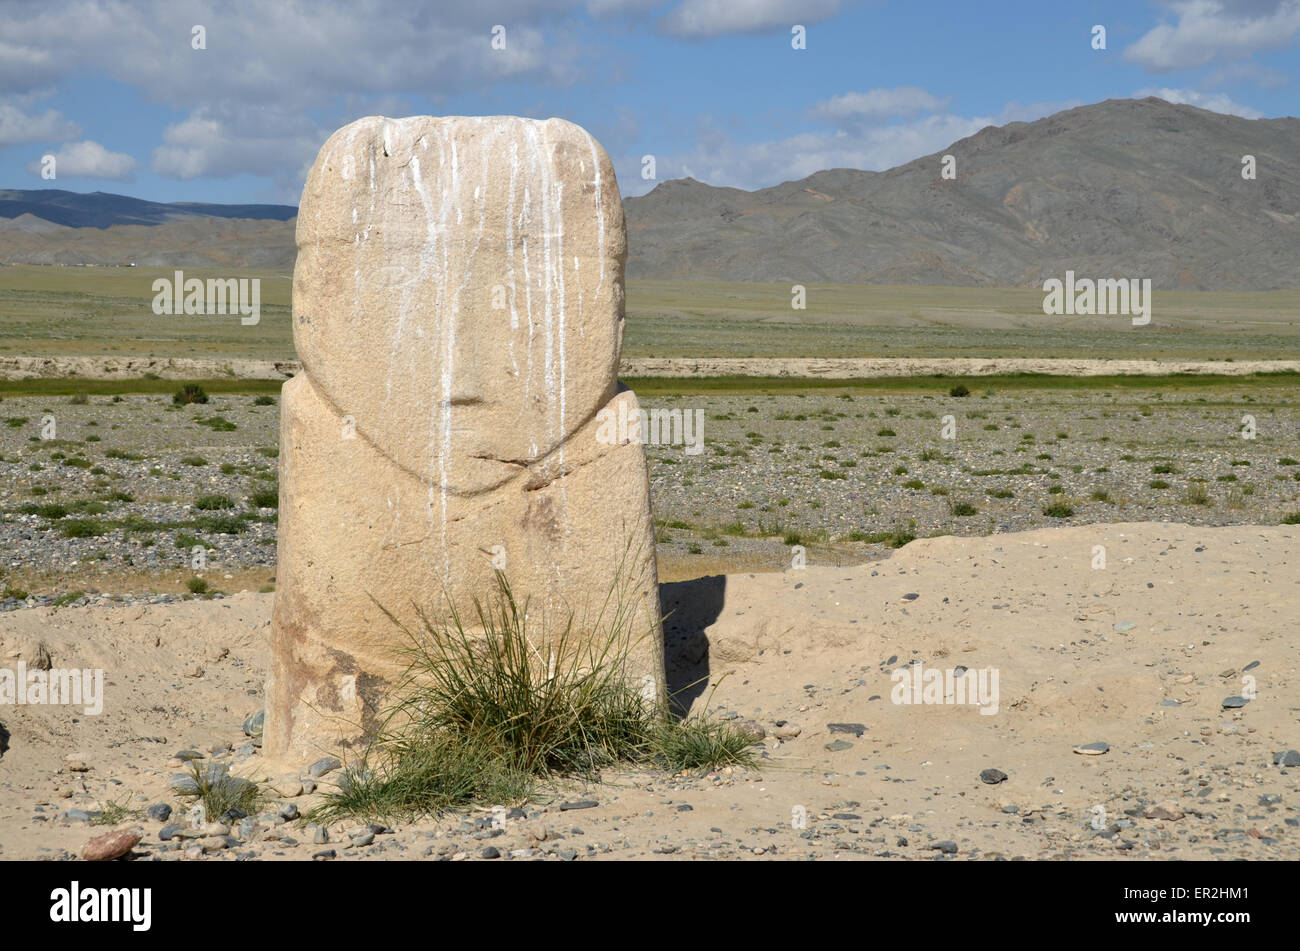 Balbal in western Mongolia, west of Olgii city, Bayan Olgii province. Balbals are antique standing stones. Stock Photo